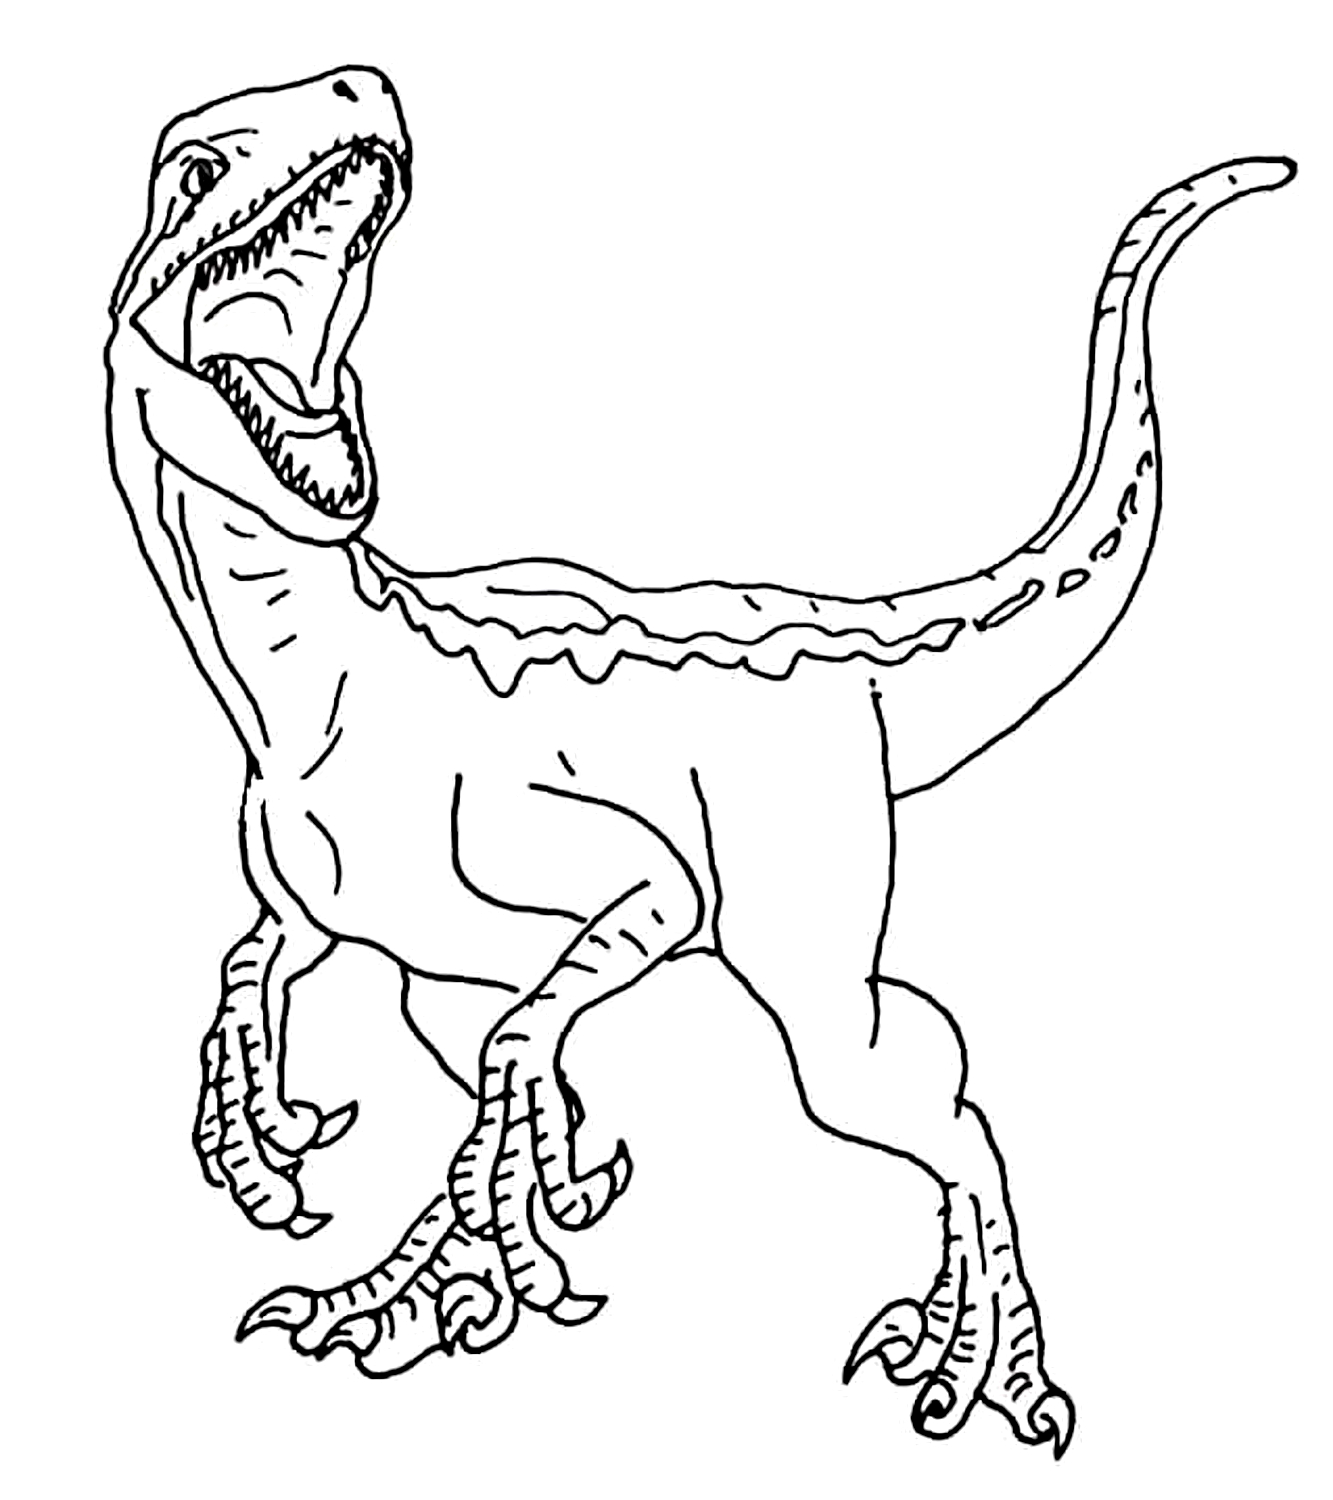 Jurassic World 08 coloring page